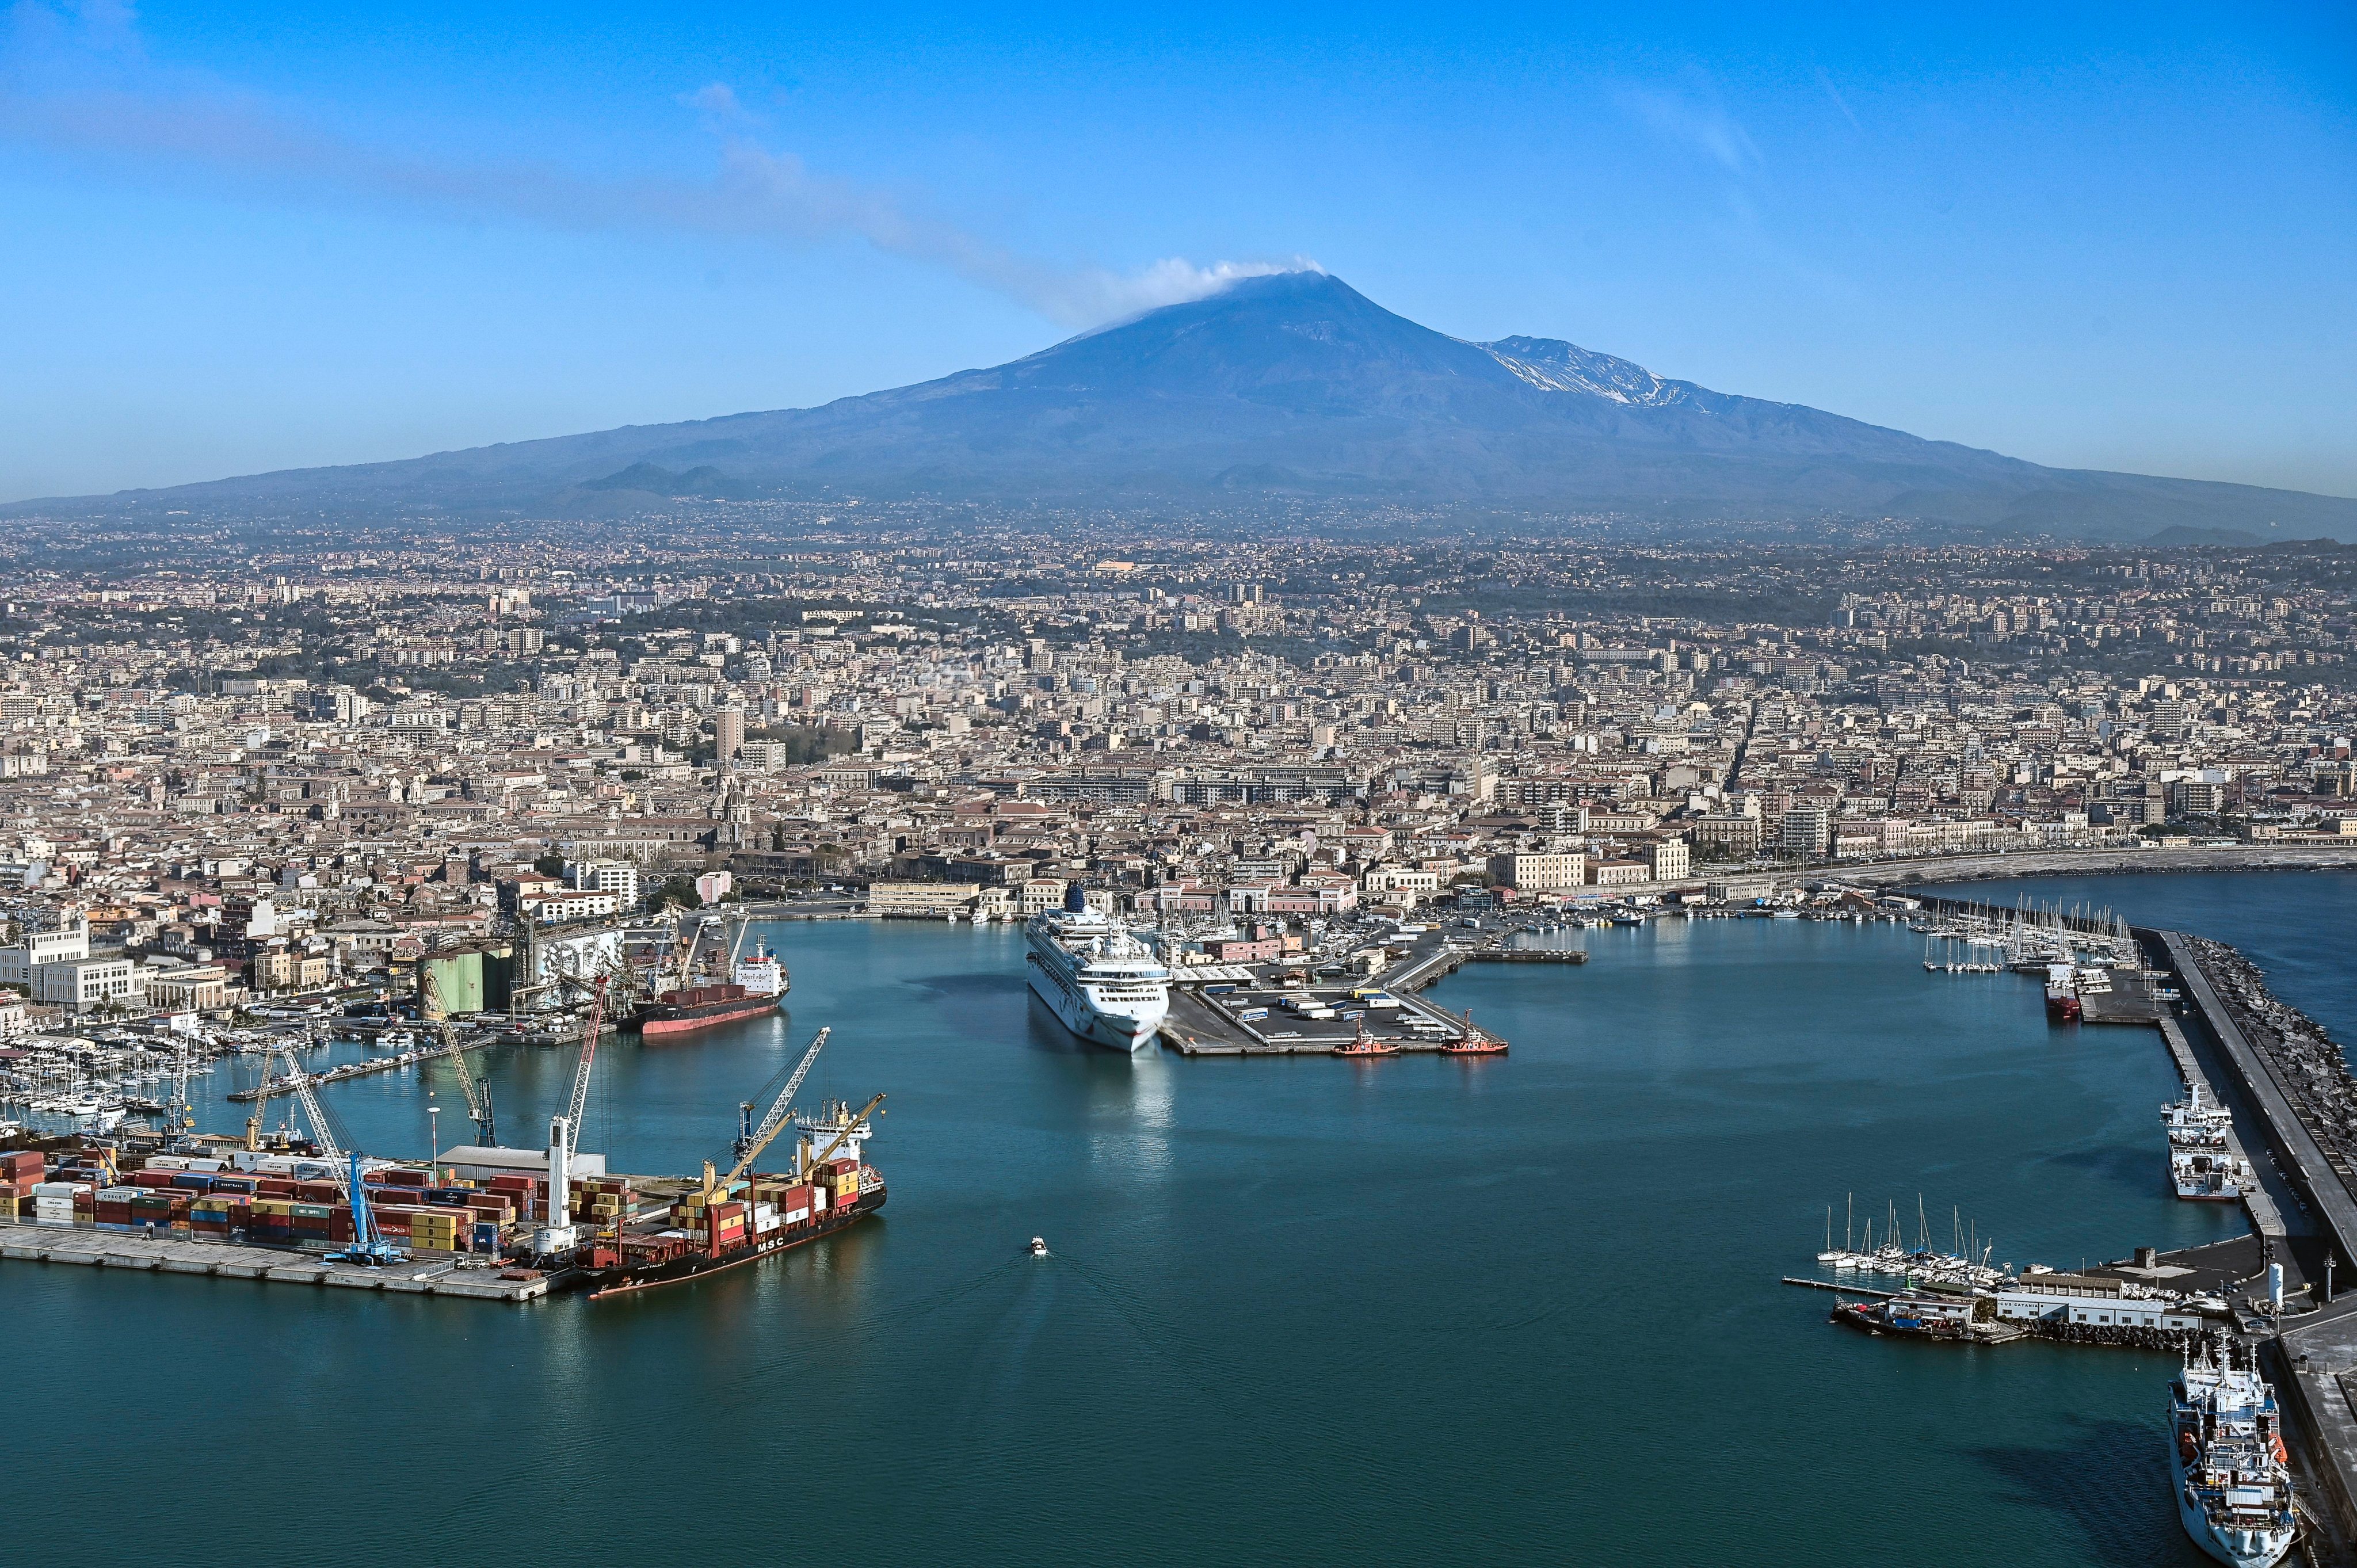 Volcanologists Watch Mount Etna From Above